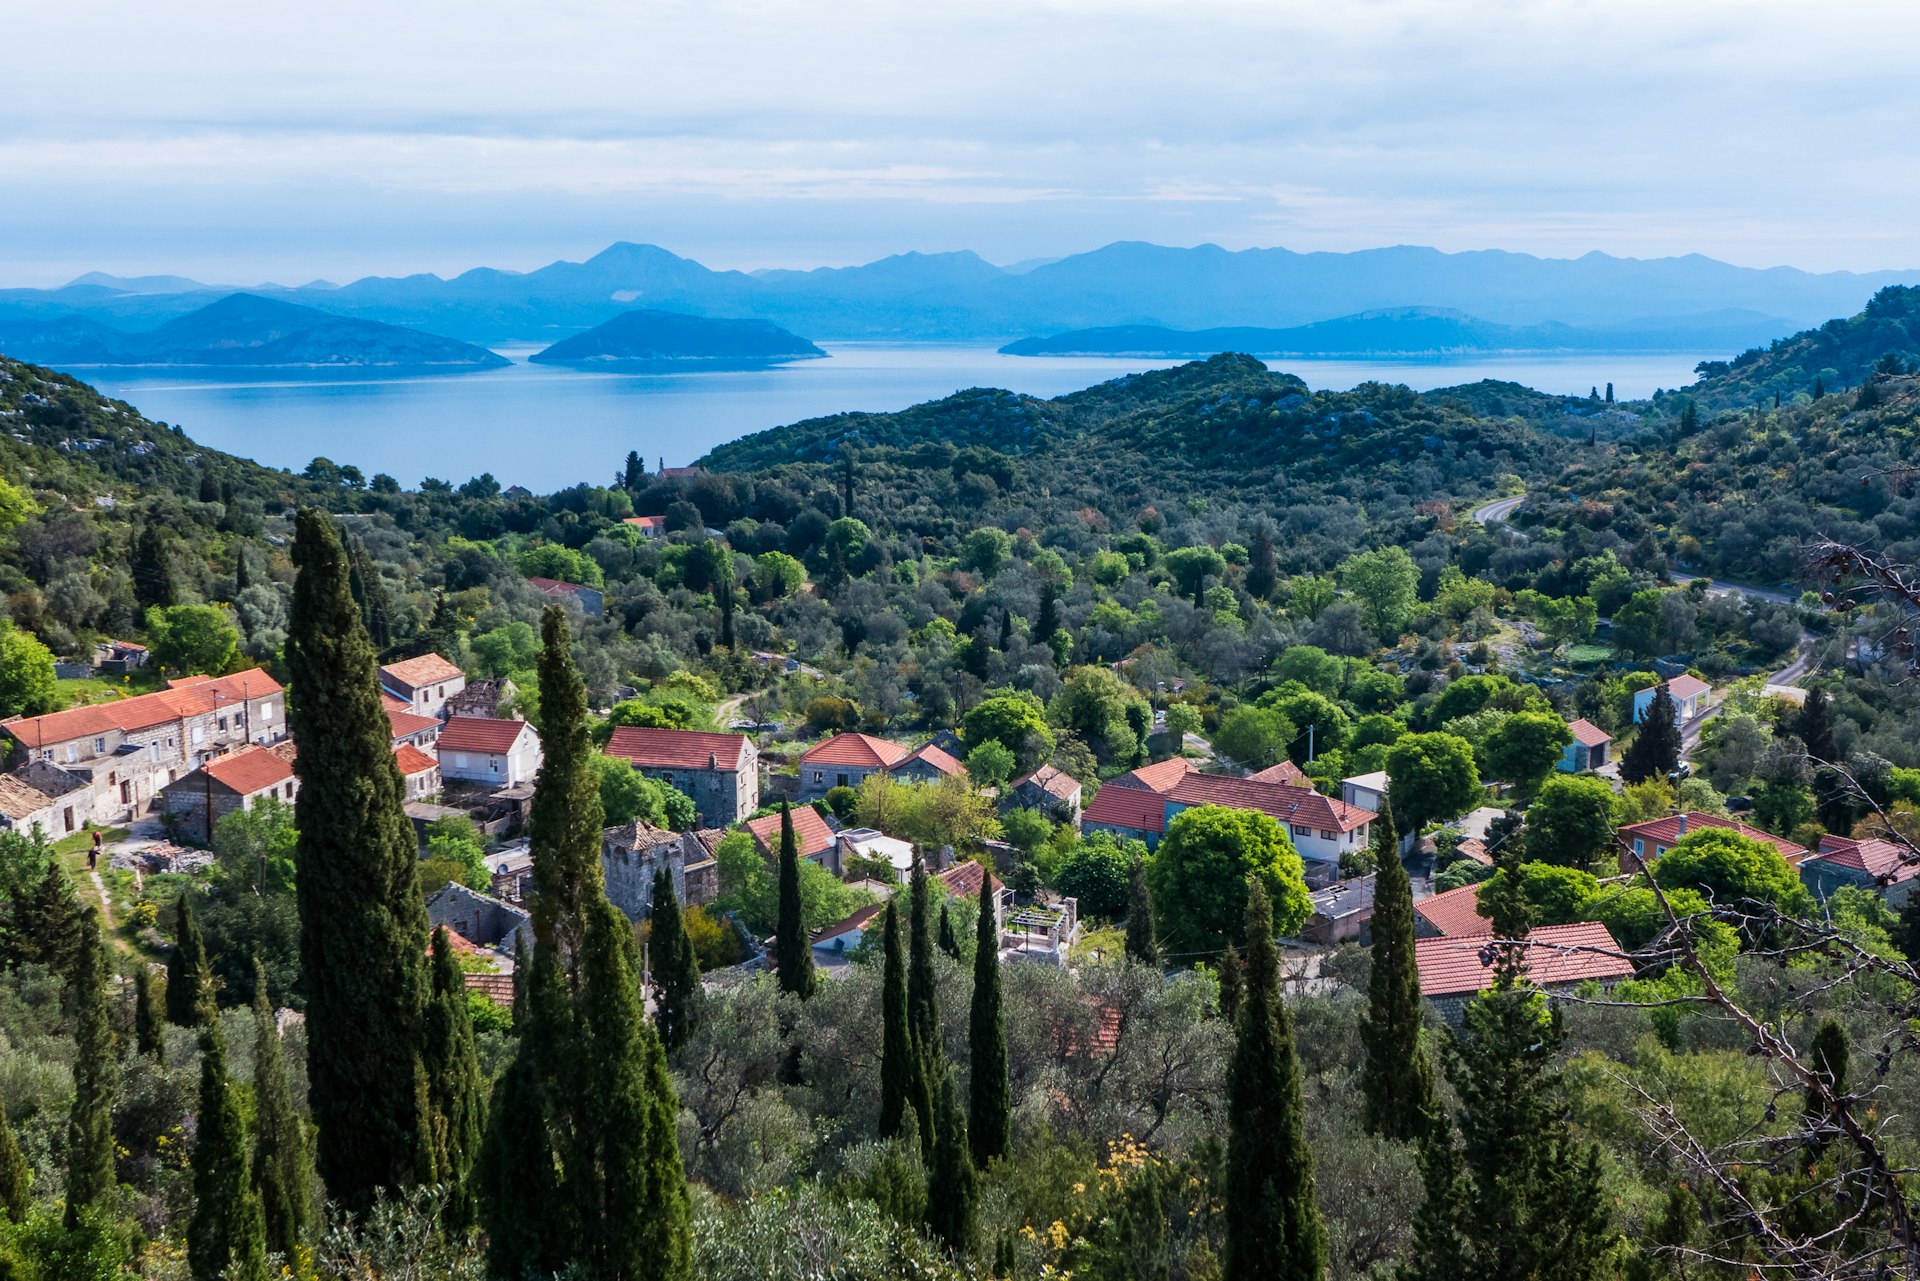 A view of a small village, forested mountains and the Adriatic Sea in the distance on Mljet, Croatia